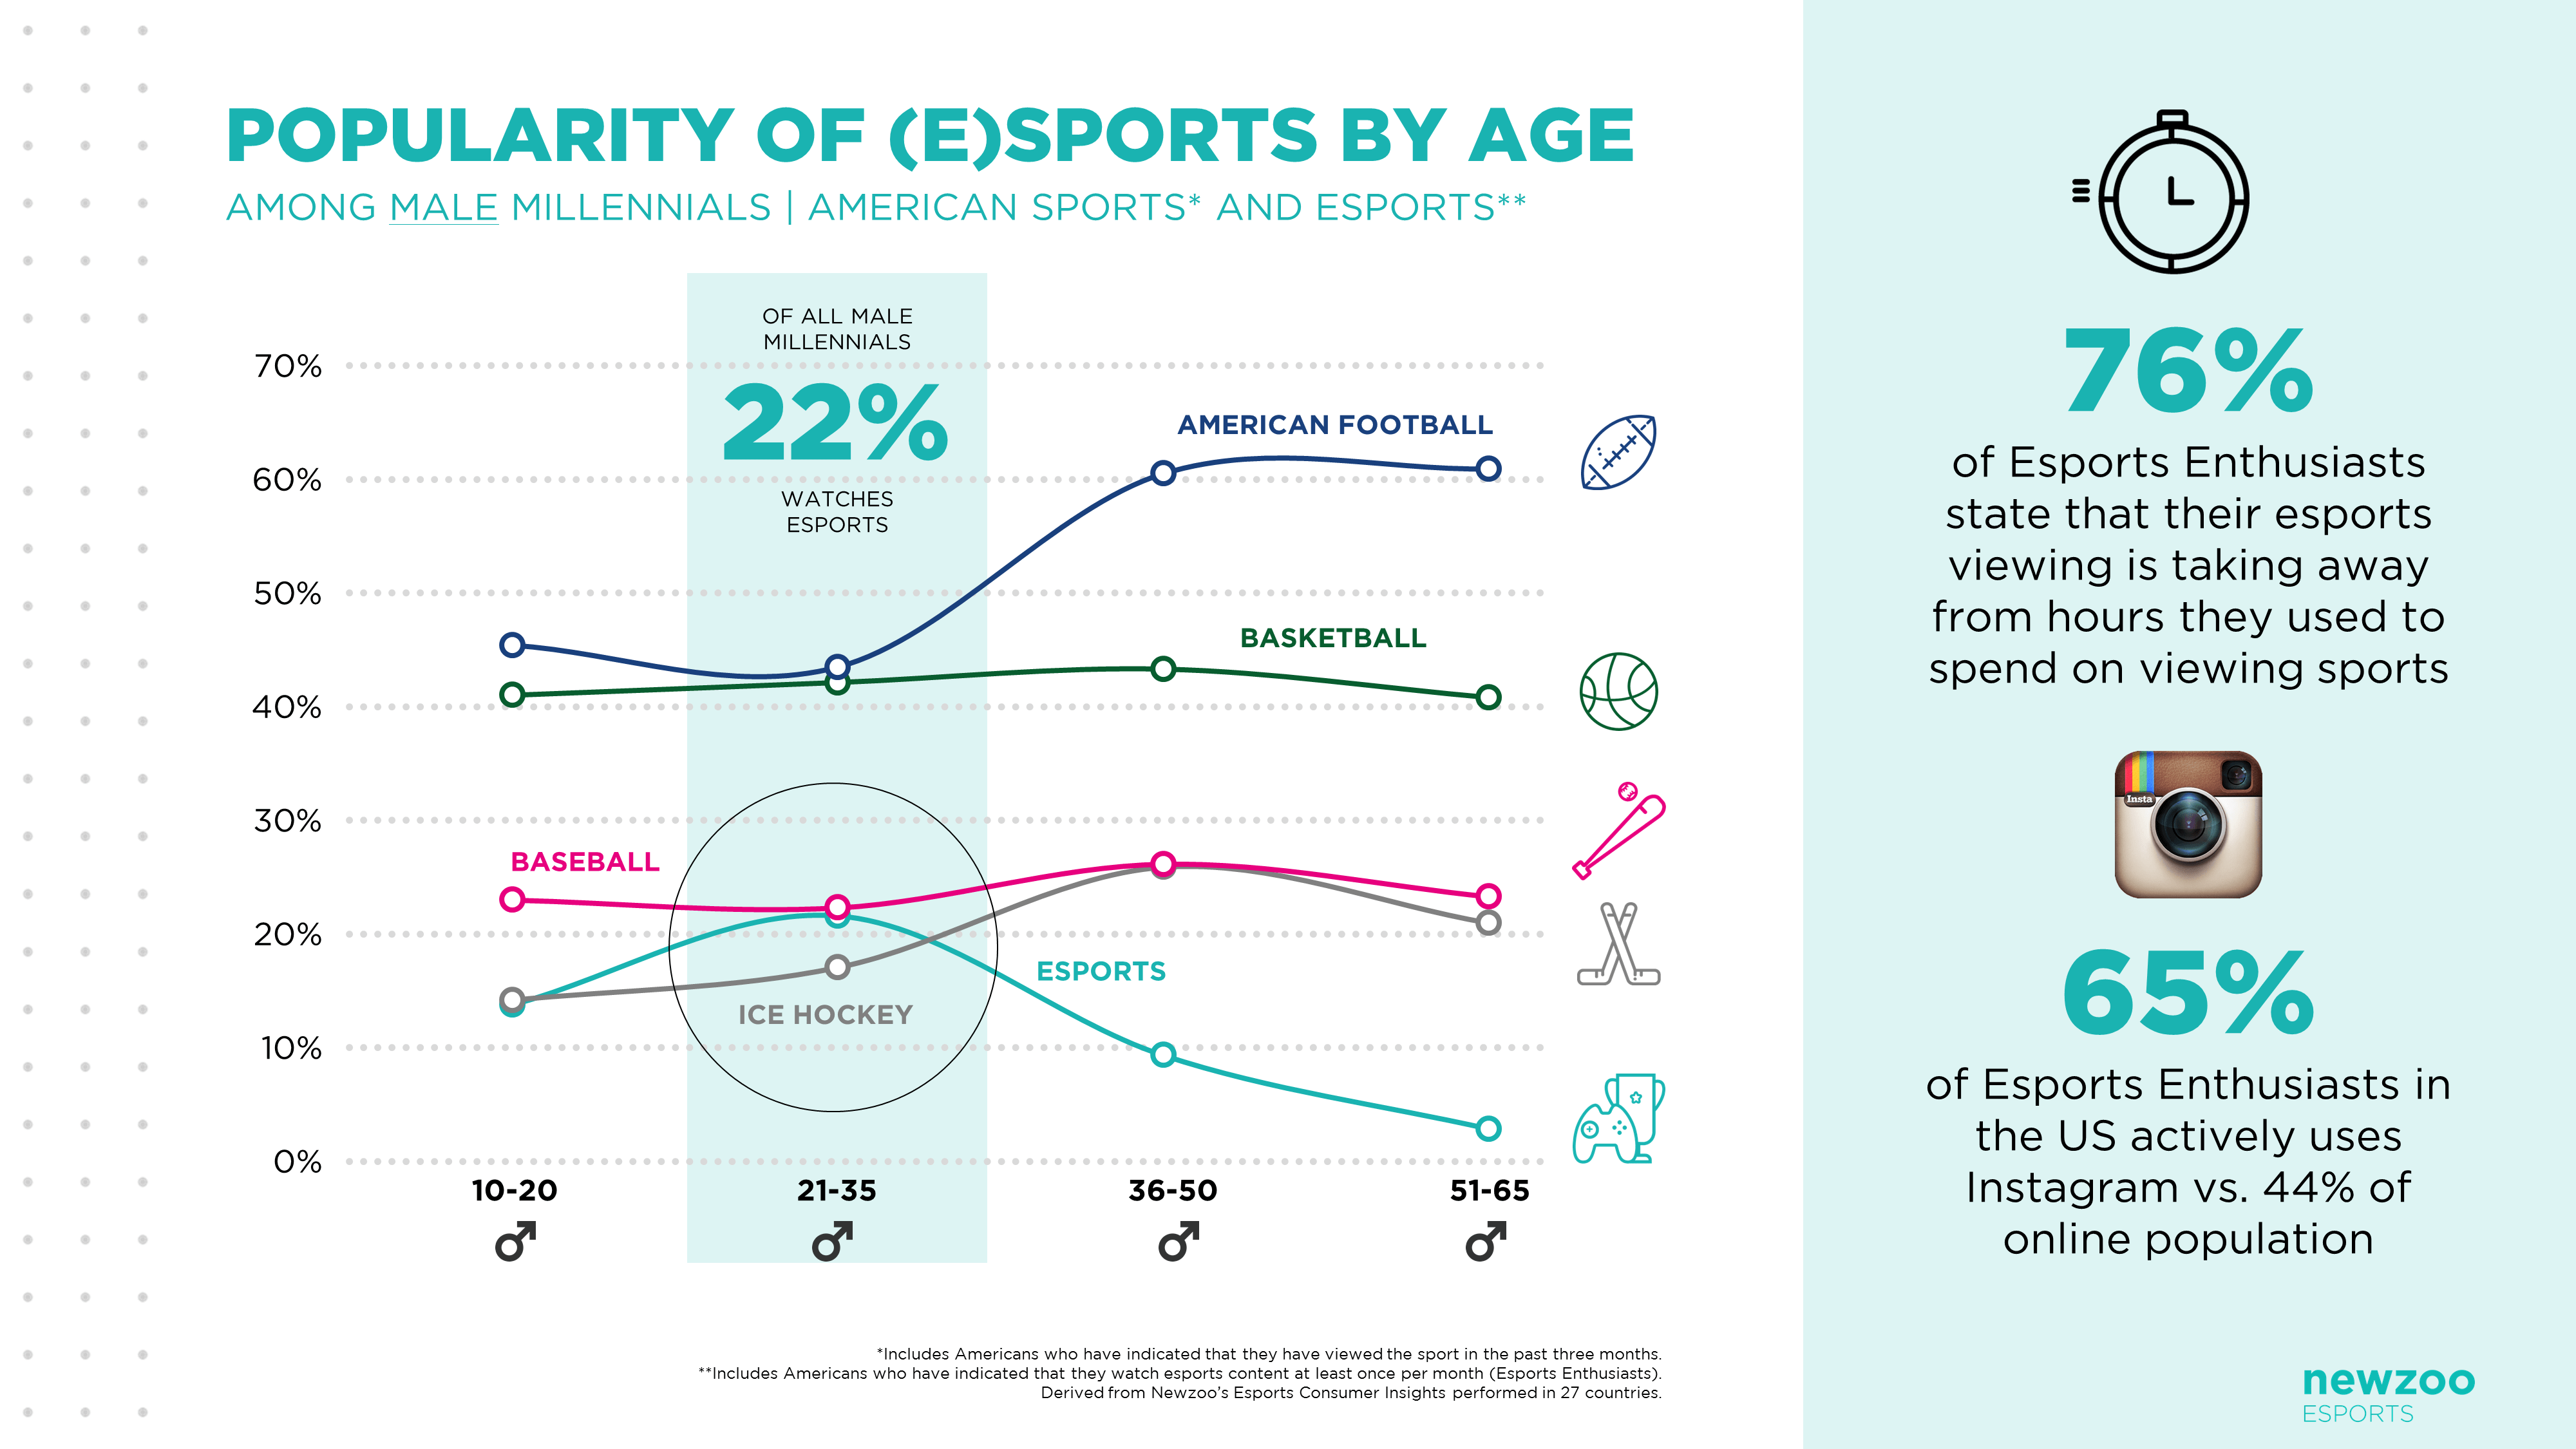 newzoo_popularity_of_esports_and_sports_by_age